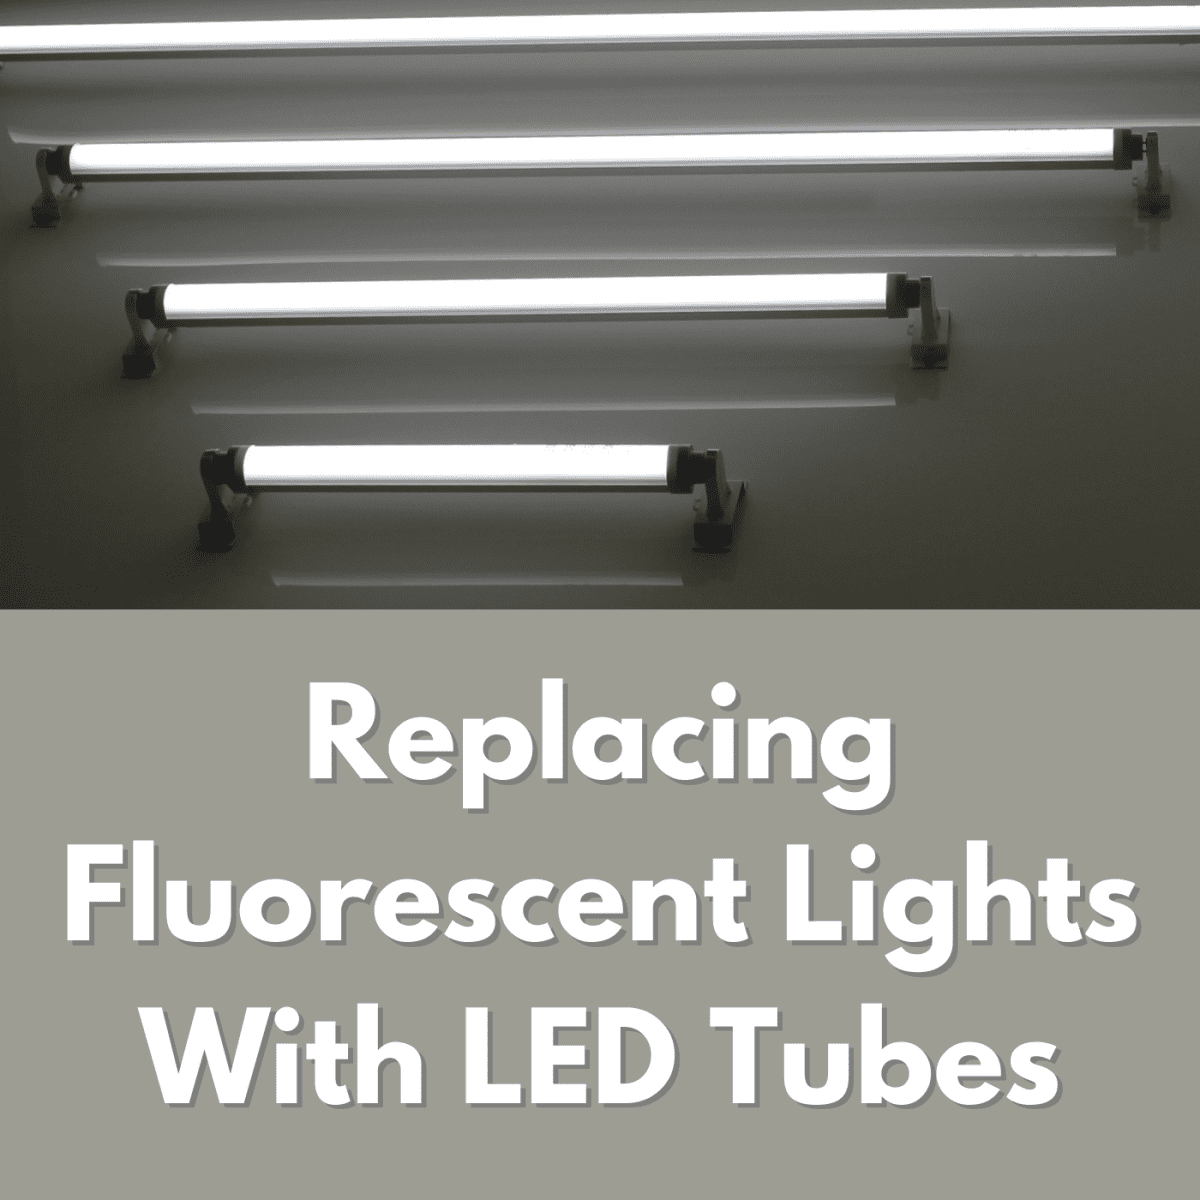 T8 Led Light, How To Replace Fluorescent Light Bulb Cover